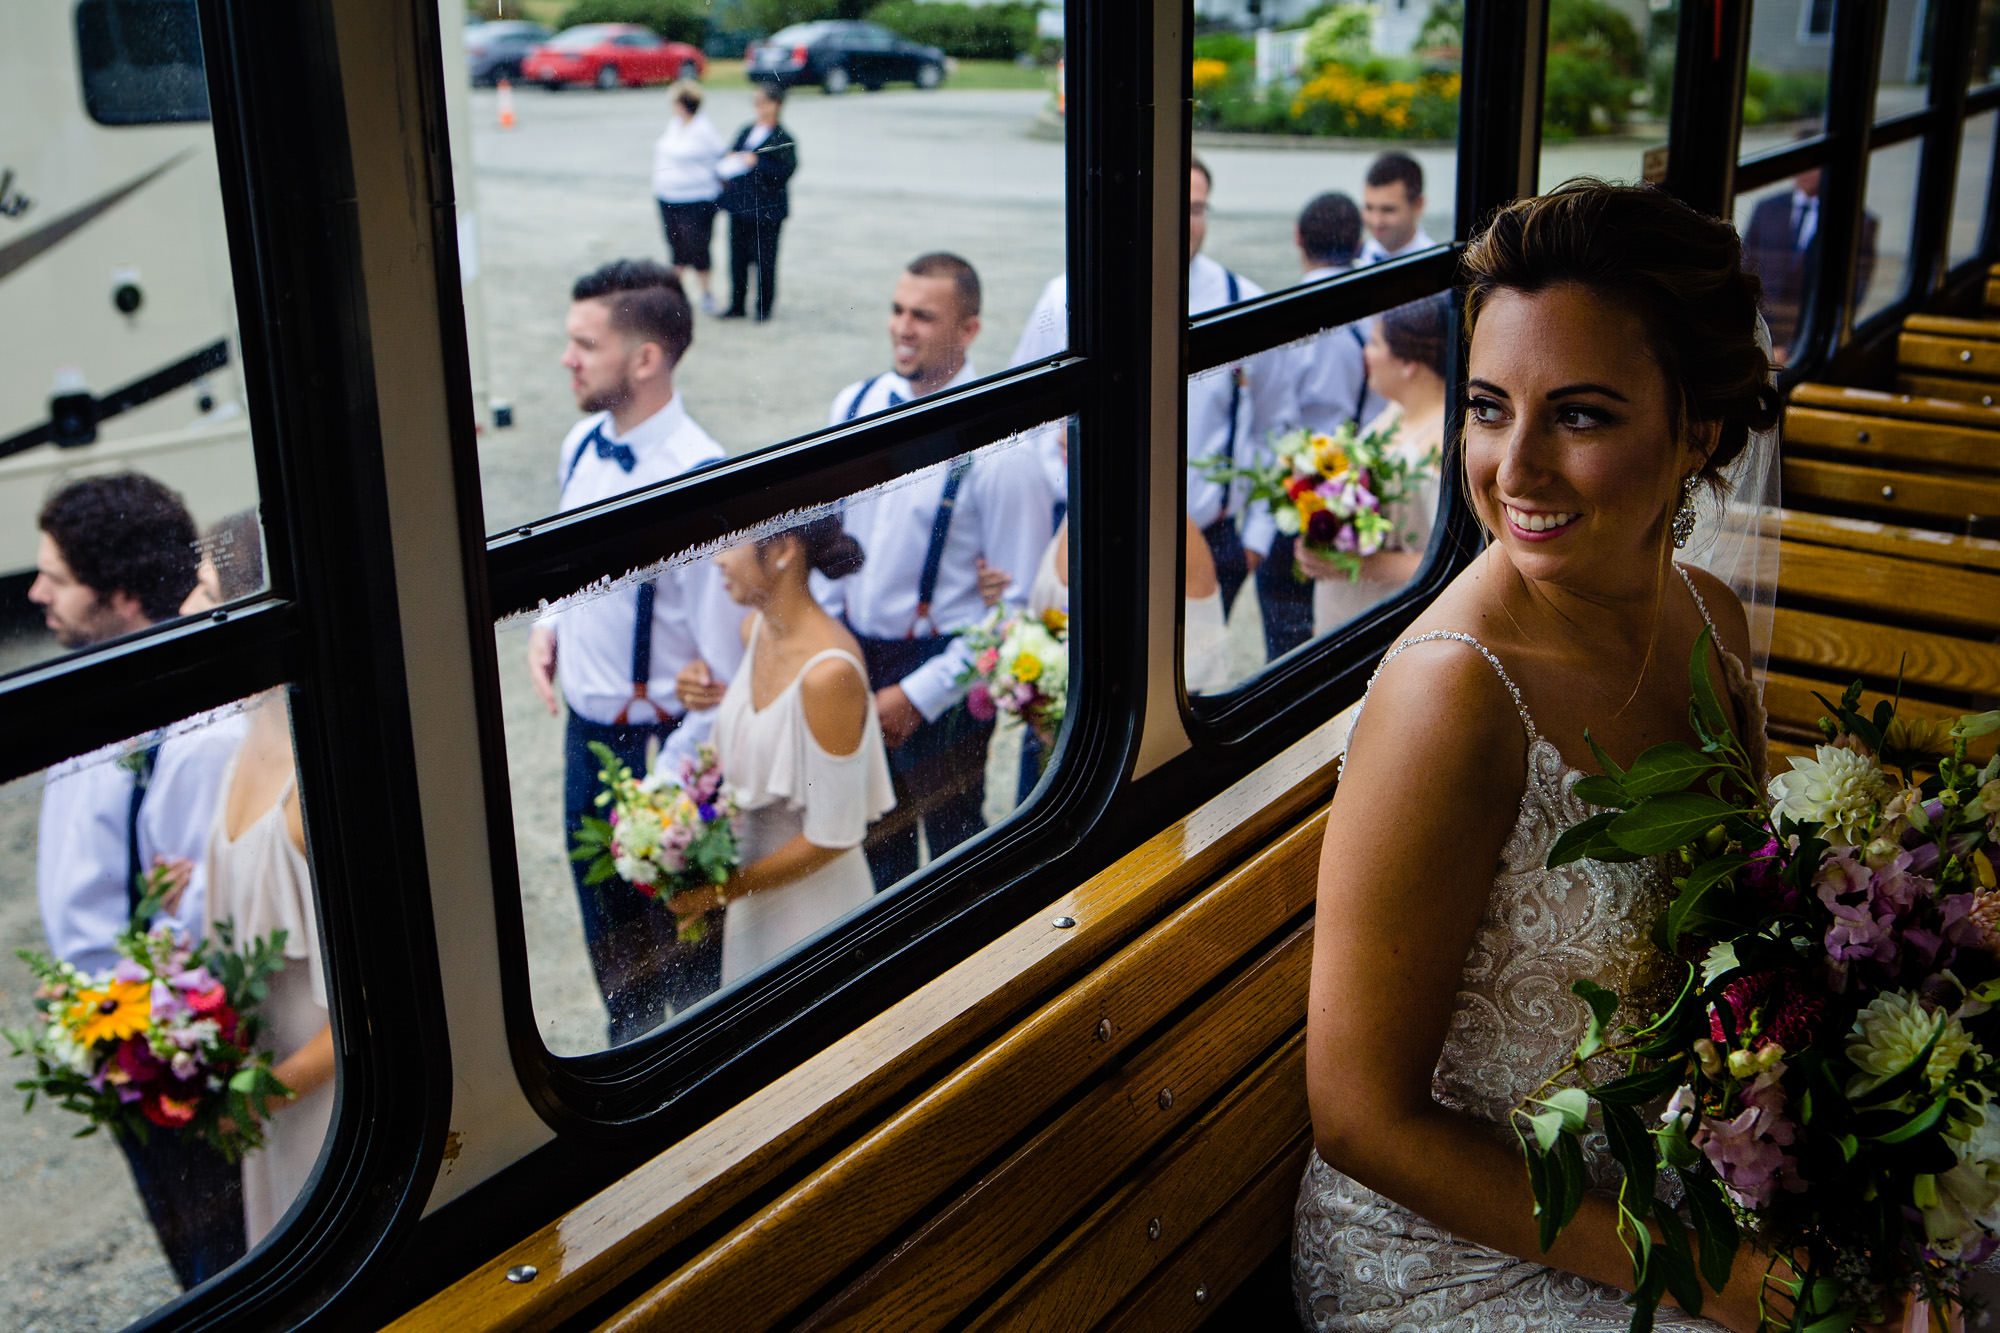 A bride waits on the trolley before her wedding ceremony at the Pemaquid Point Lighthouse